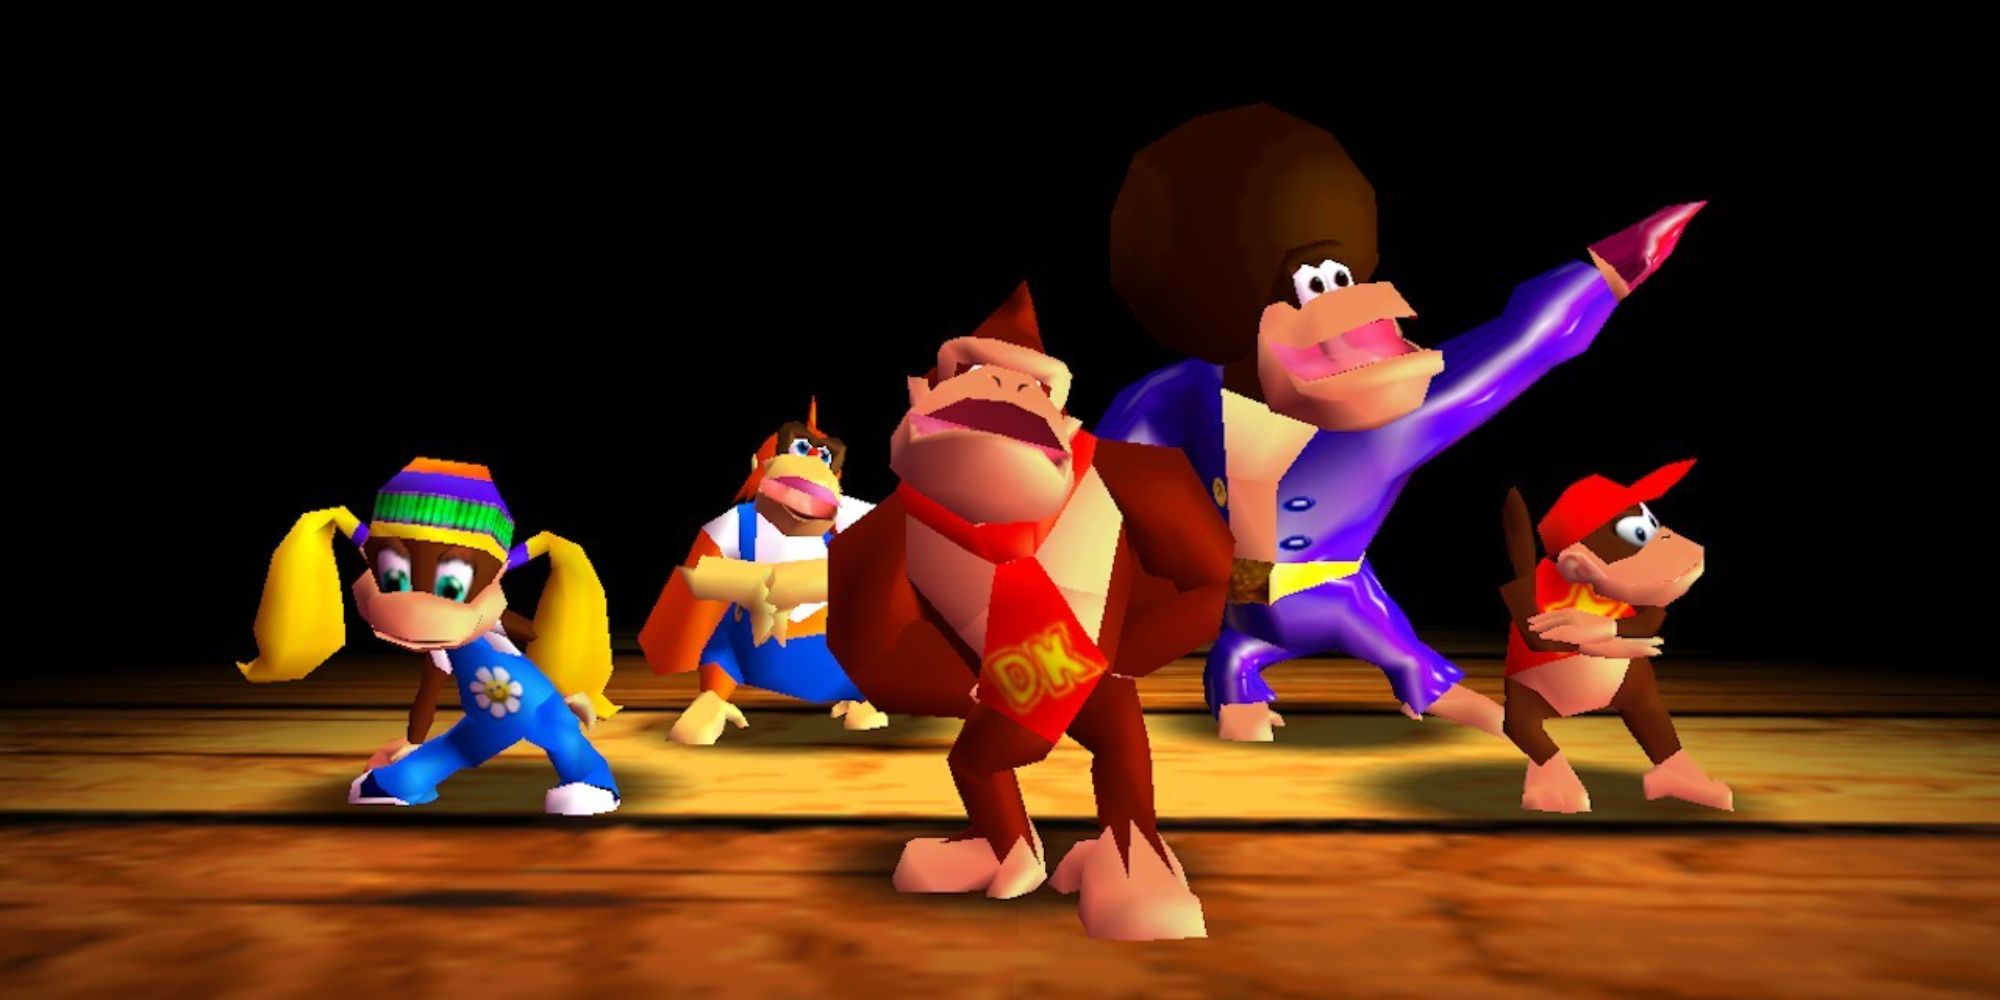 The Donkey Kong 64 characters in the DK Rap intro